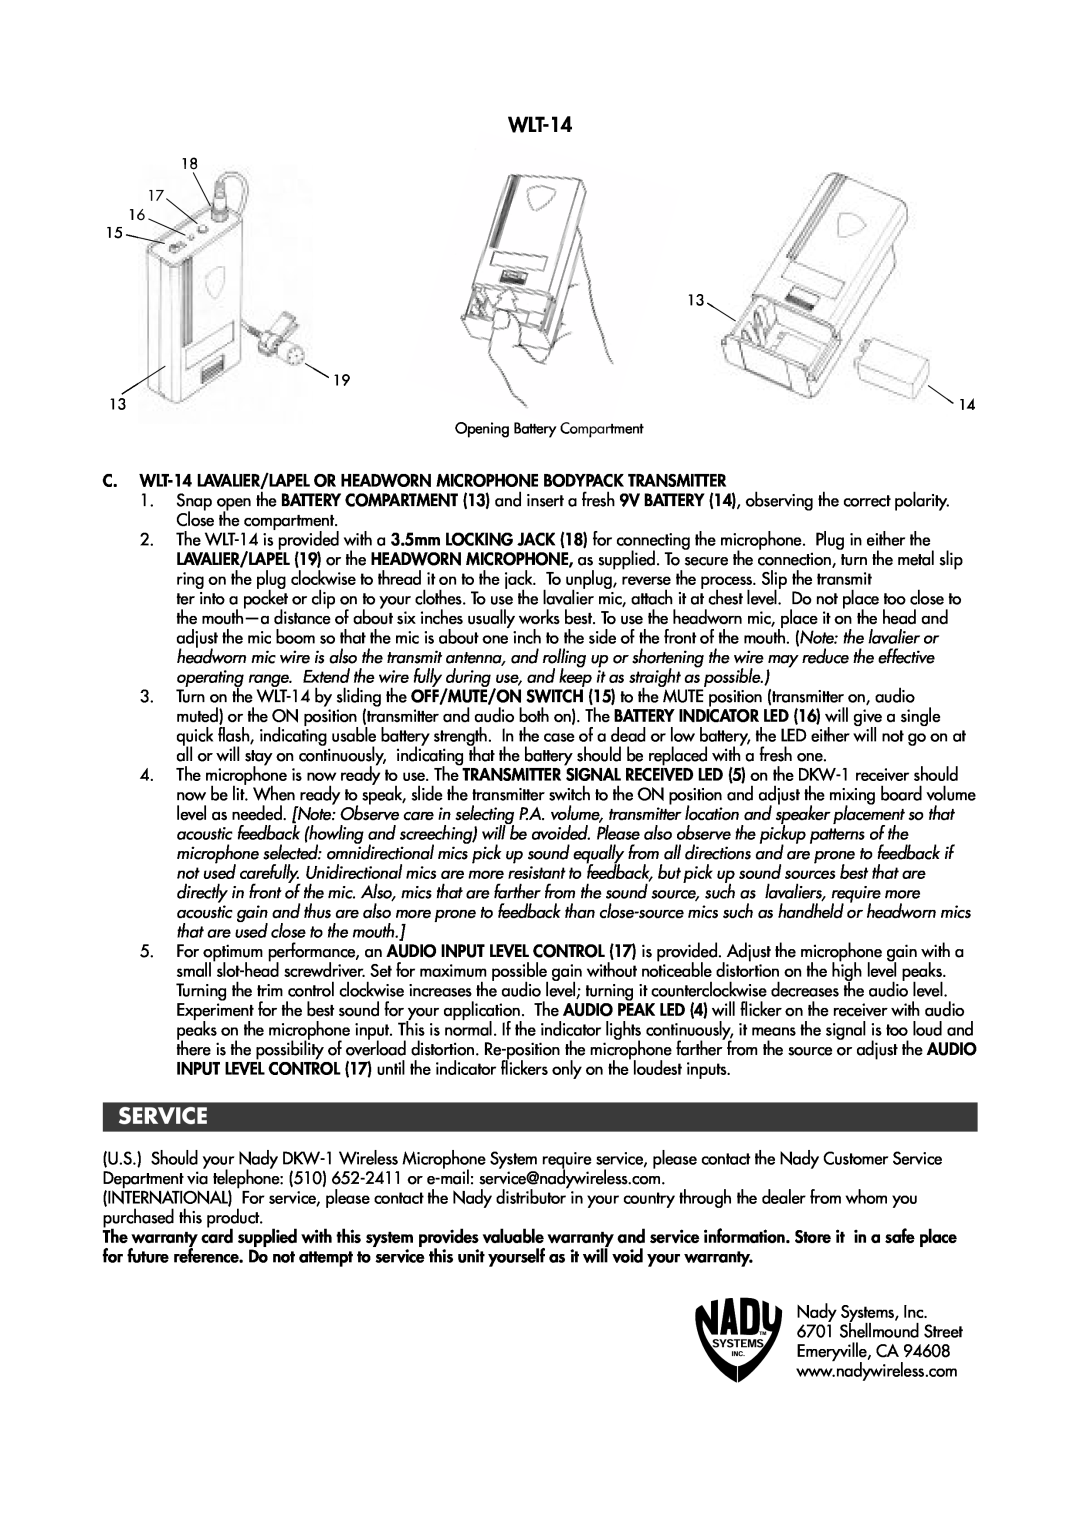 Nady Systems DKW1HTBSYS, DKW1HTDSYS, DKW1HTHSYS, DKW1HTASYS115, DKW1HTNSYS, DKW1HTESYS115 operating instructions Service, WLT-14 